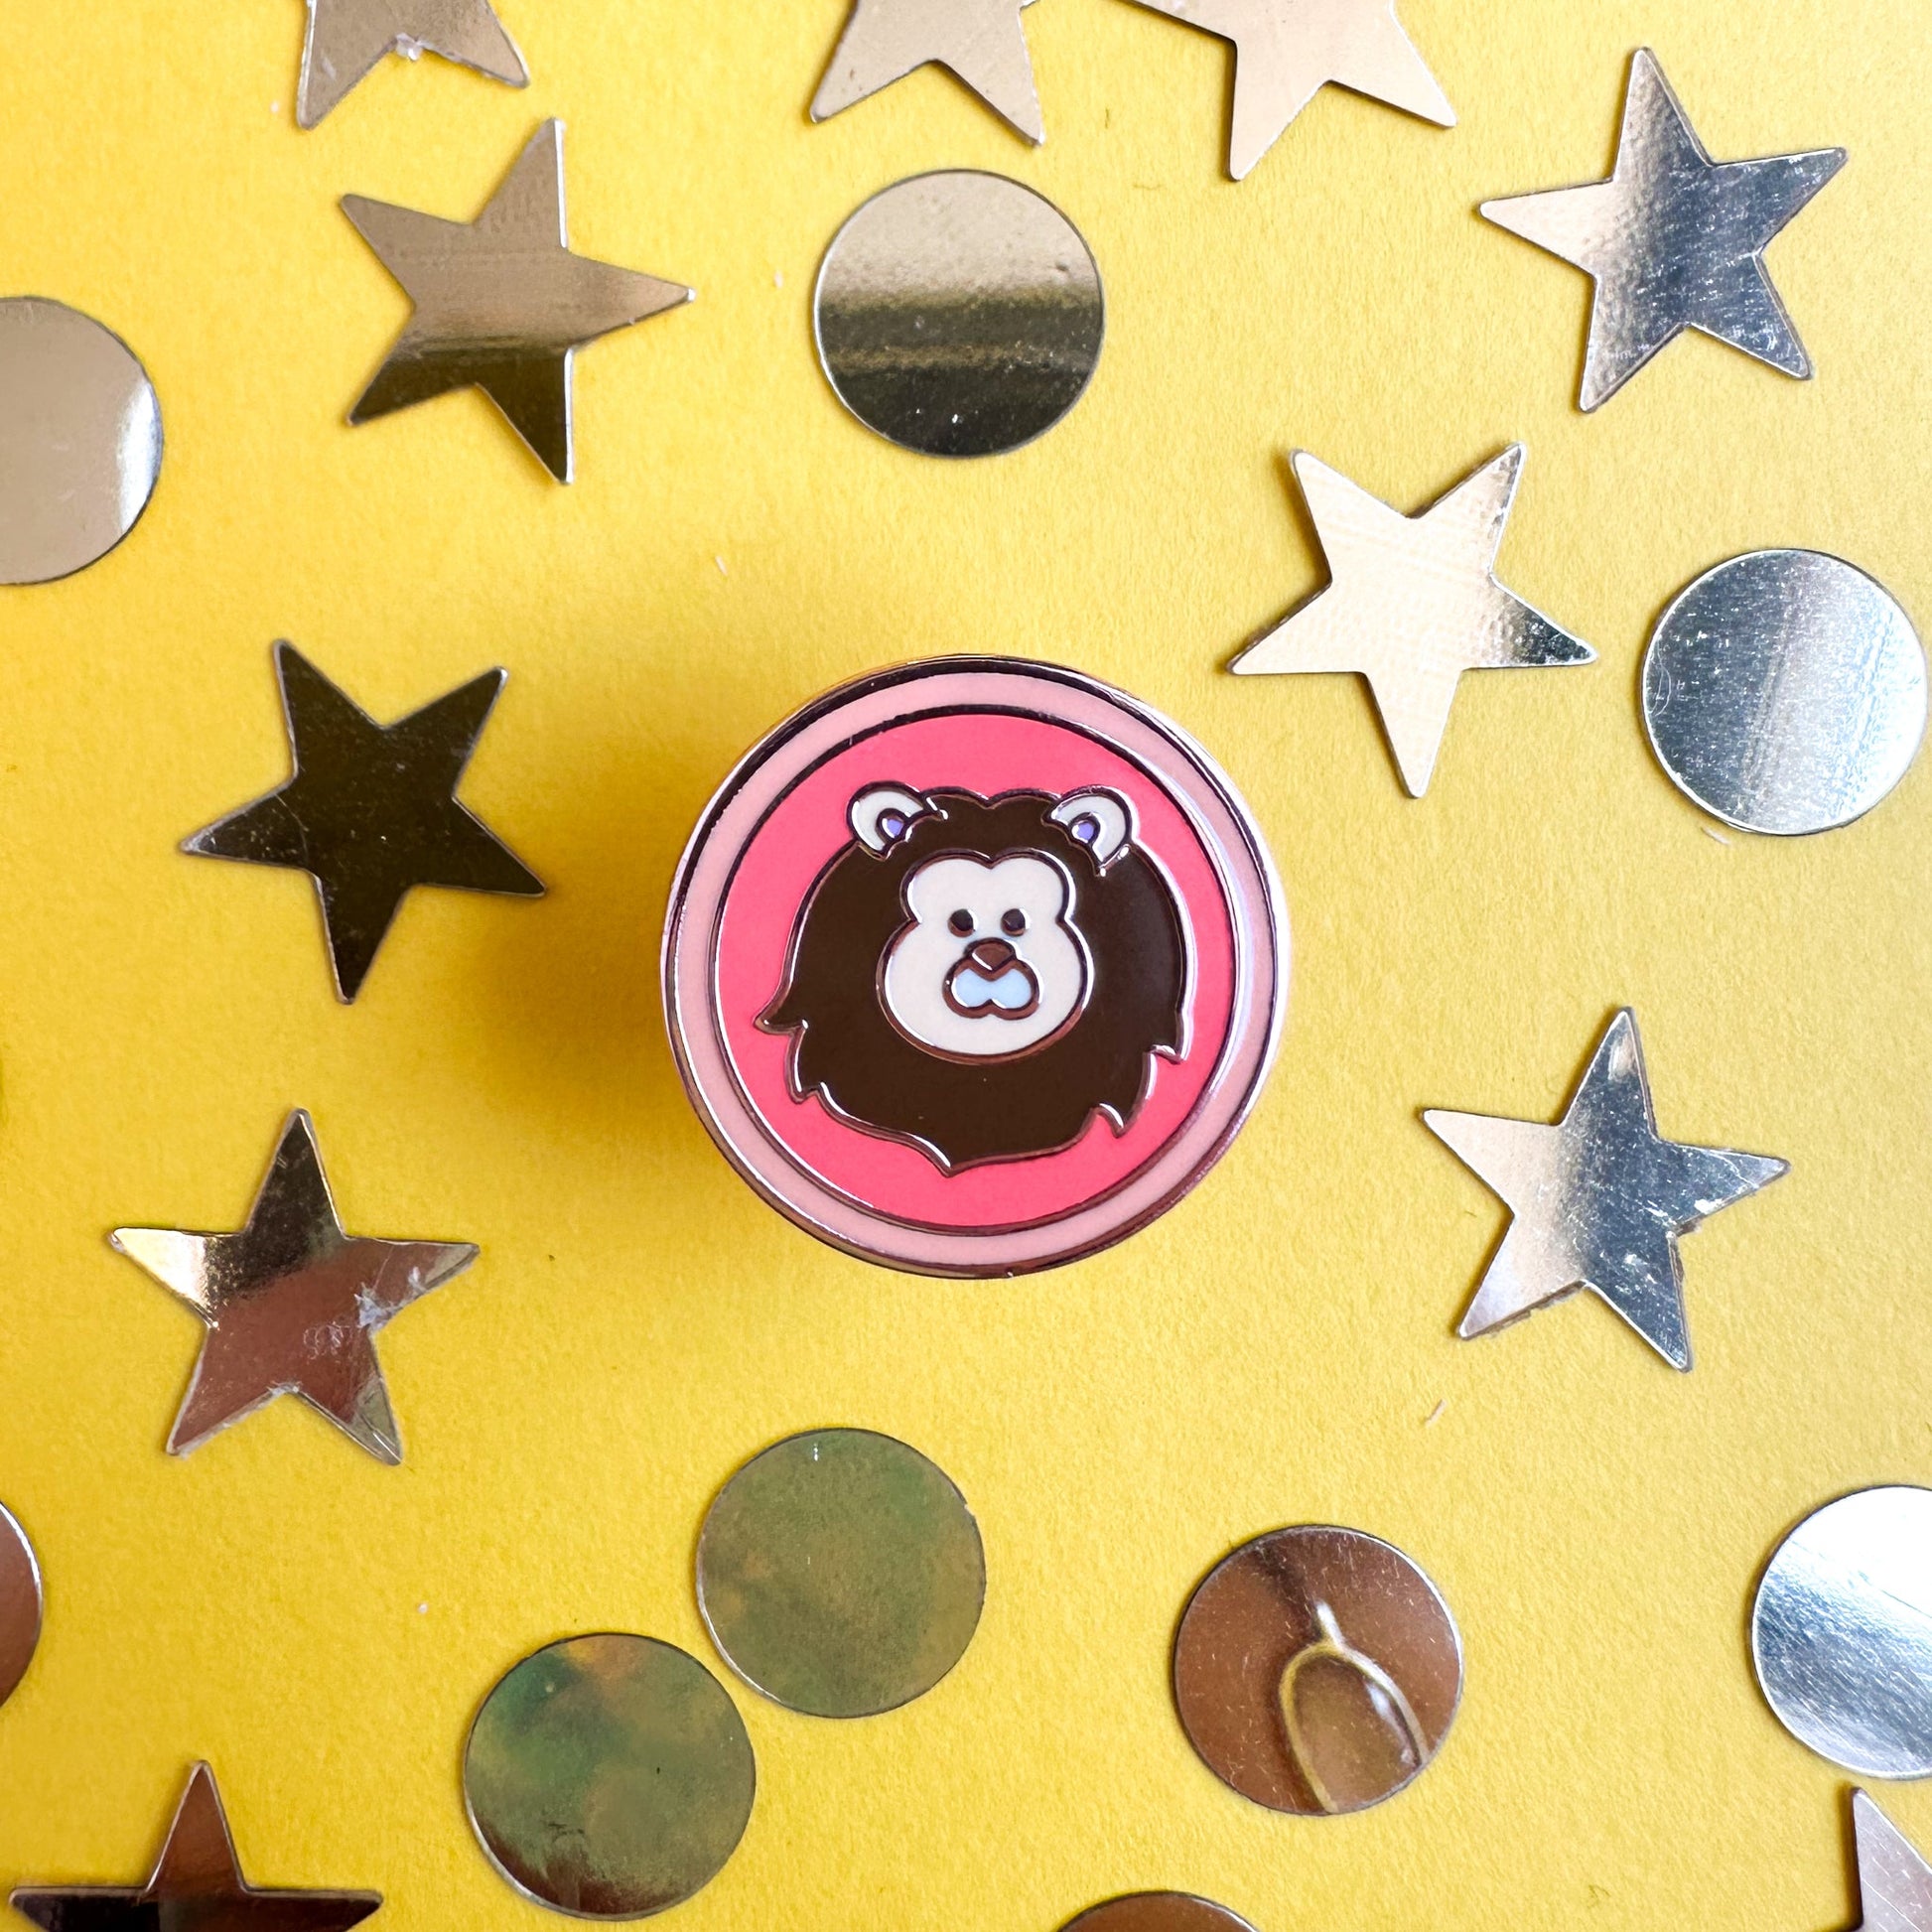 A circle enamel pin with a cute Lion image in it to represent the Leo zodiac sign. The pin is on a yellow background covered in gold star and circle confetti. 